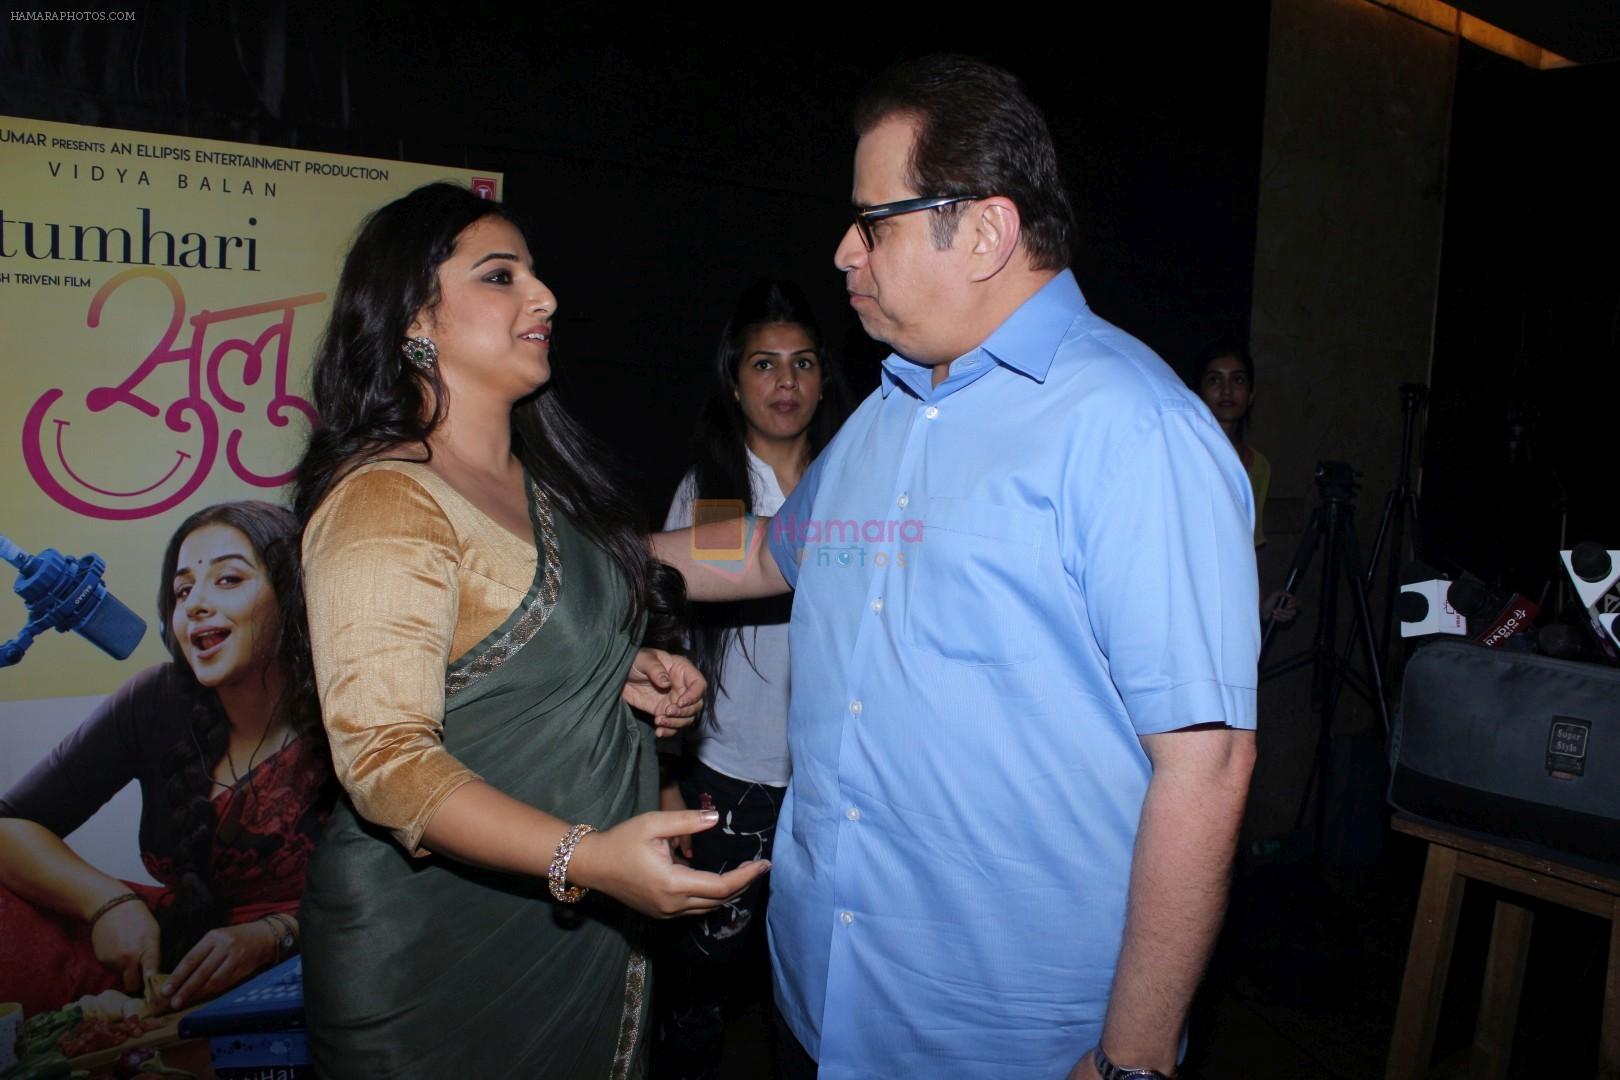 Ramesh Taurani at the Red Carpet and Special Screening Of Tumhari Sulu hosted by Vidya Balan on 14th Nov 2017